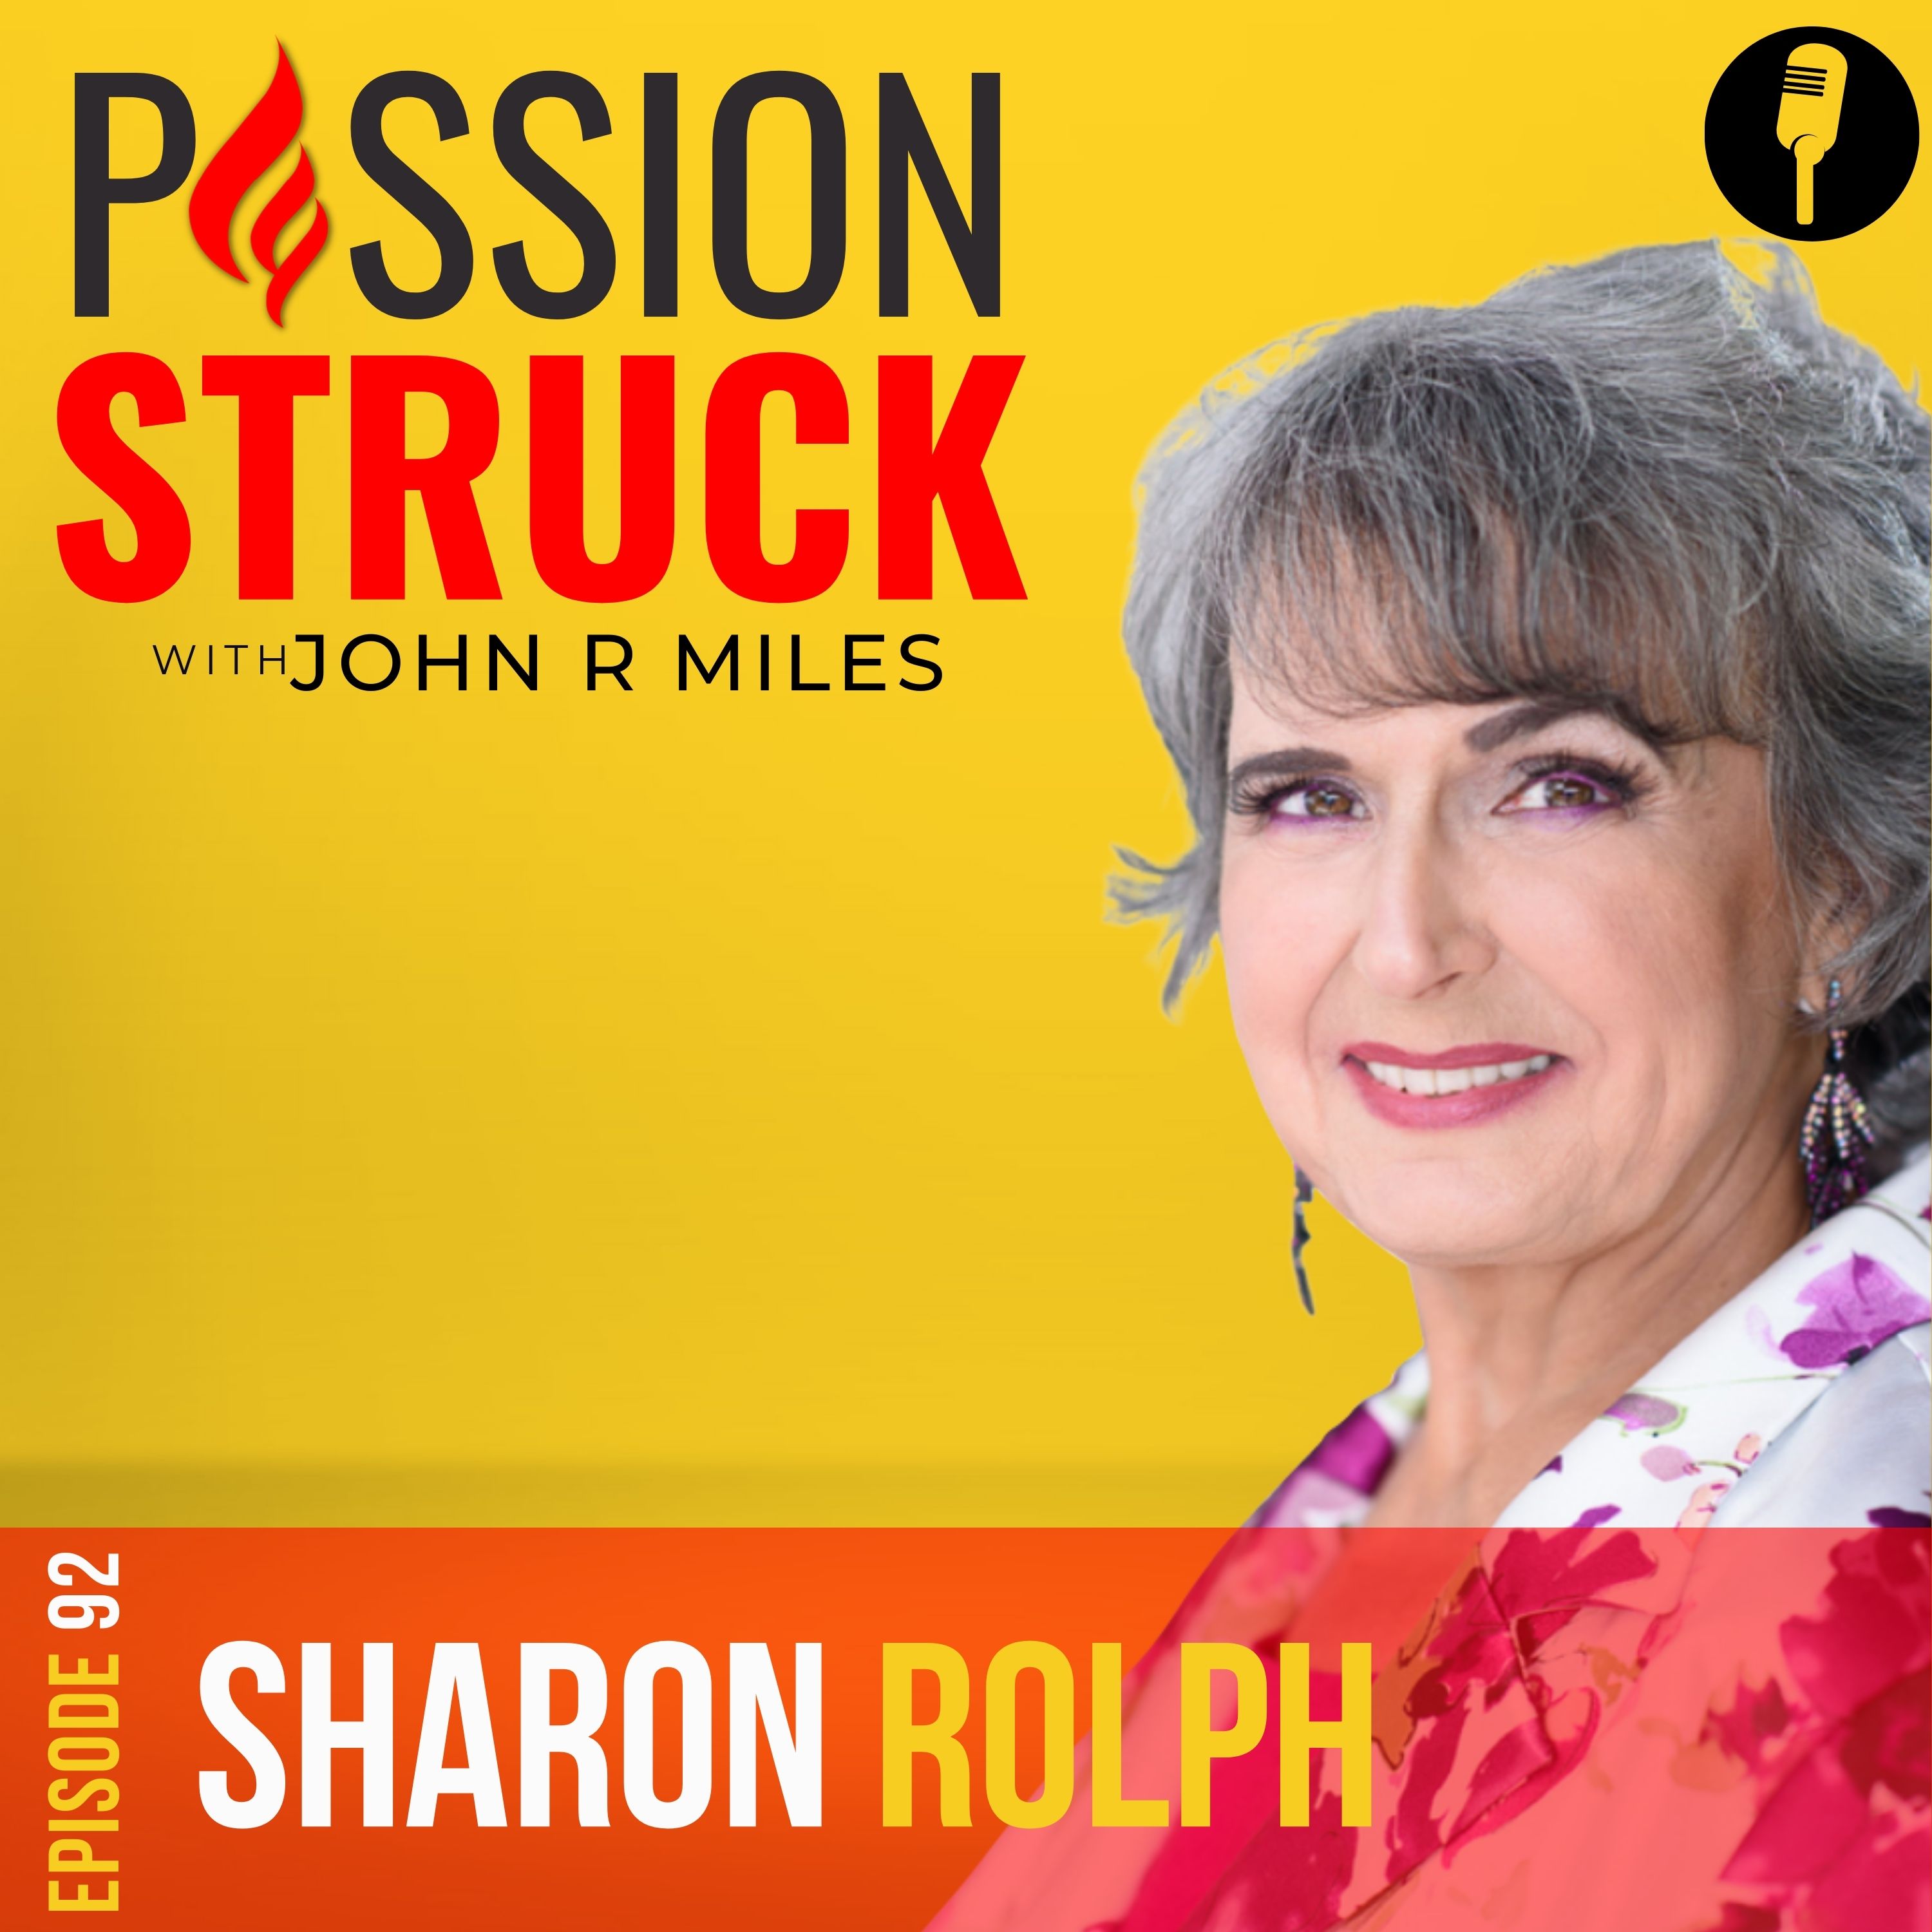 Passion Struck podcast album cover with Sharon Rolph on finding your essence